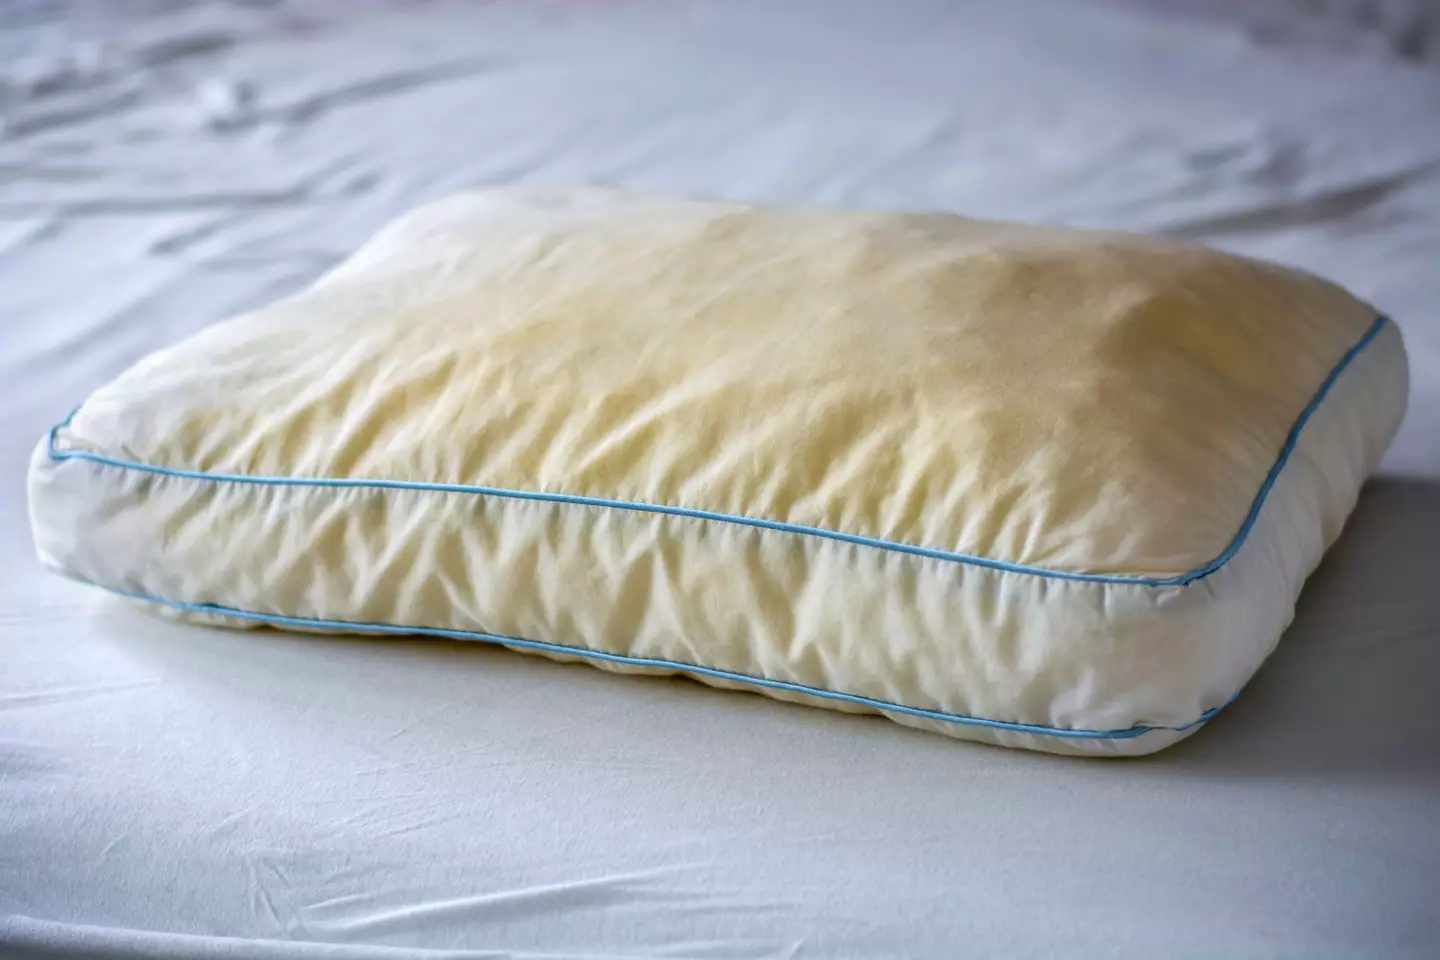 If your pillow looks anything like this, chuck it out.